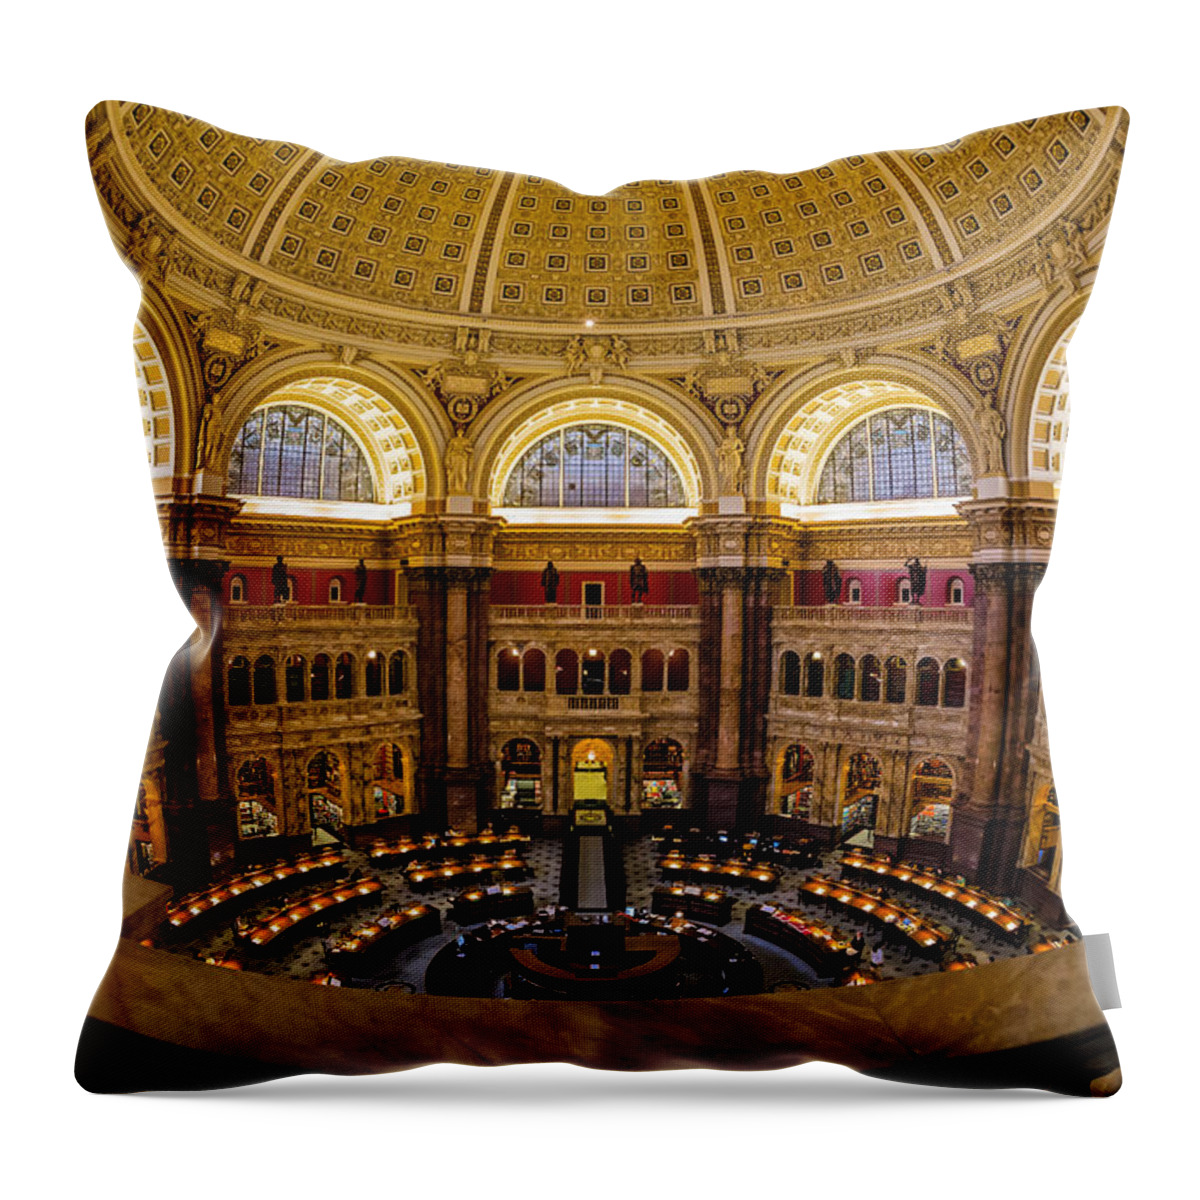 Library Of Congress Throw Pillow featuring the photograph Library Of Congress Main Reading Room by Susan Candelario